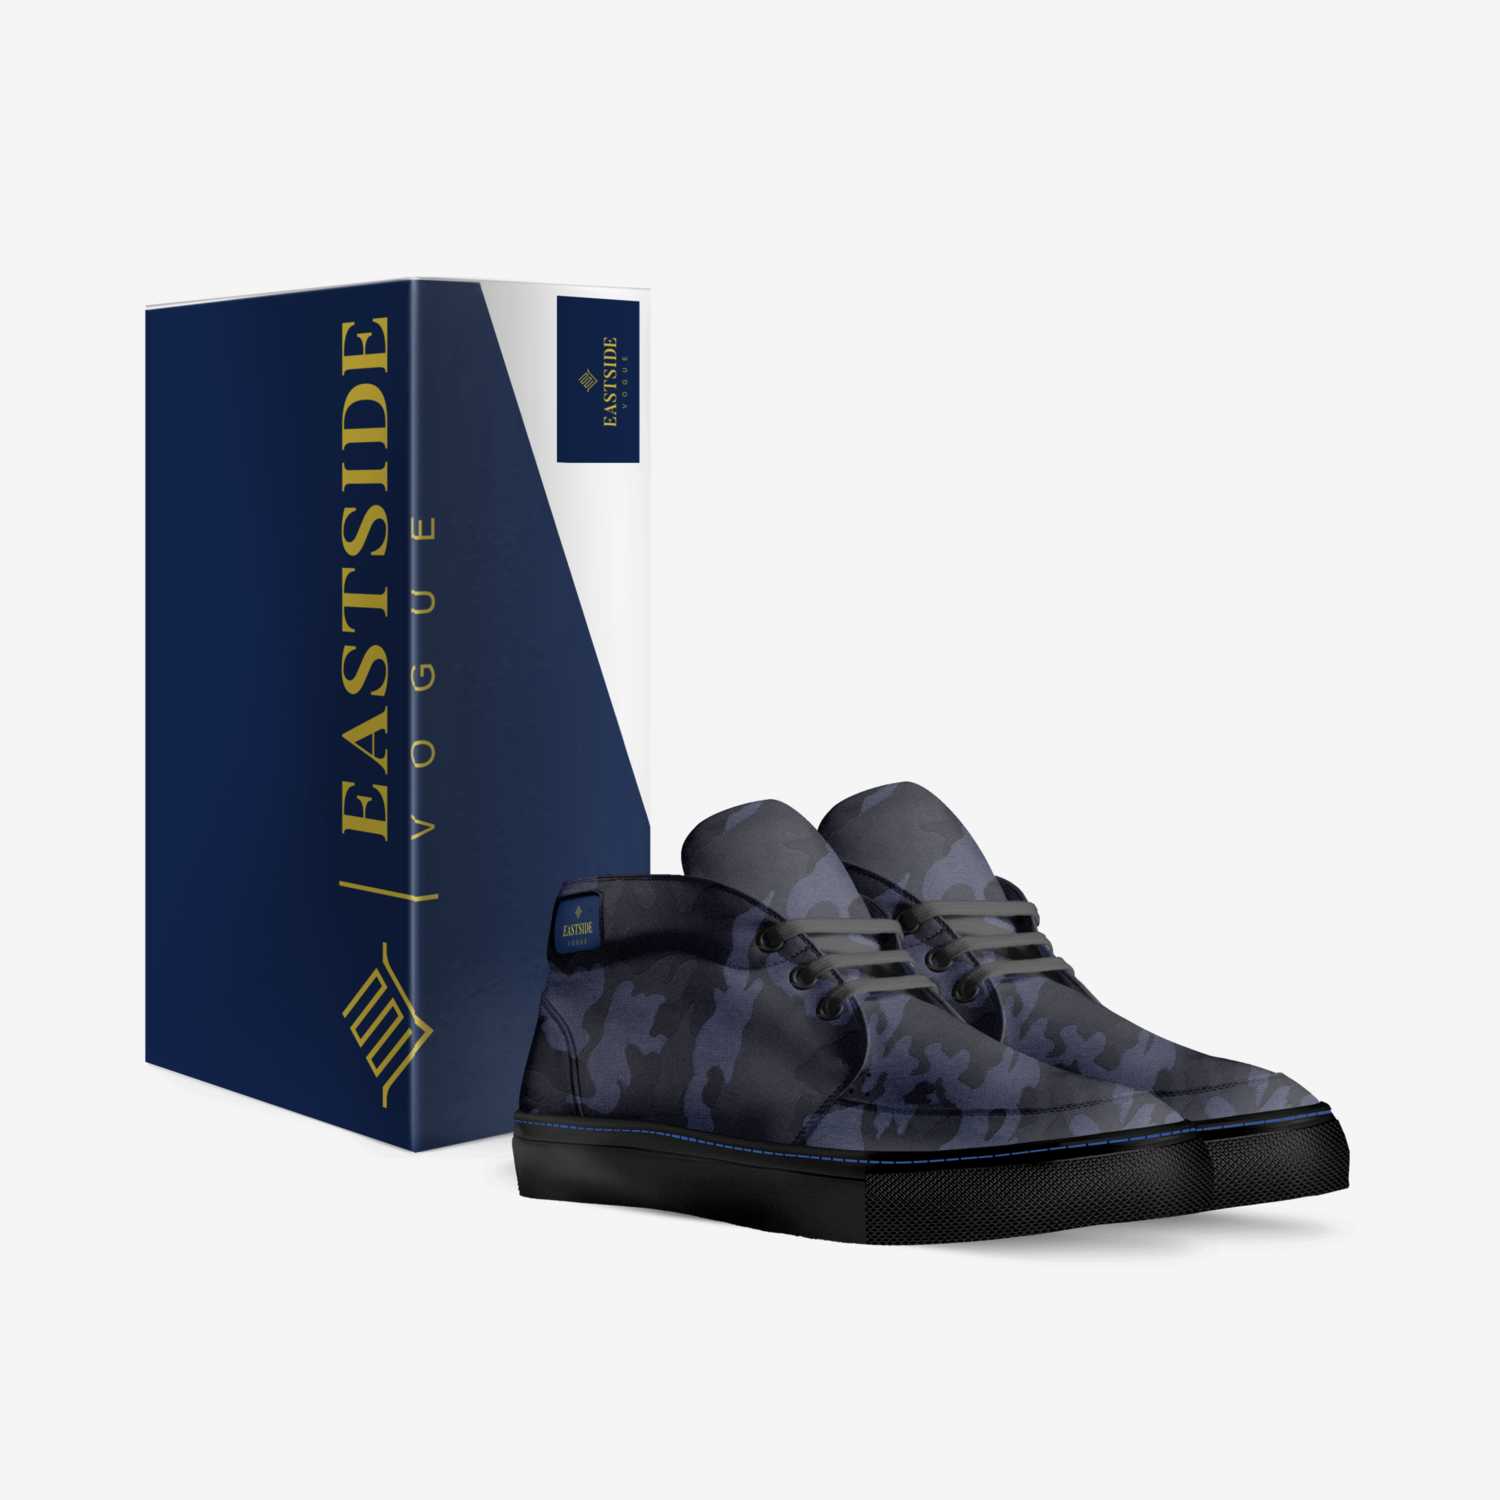 ESV's custom made in Italy shoes by Kenneth Katahoire | Box view